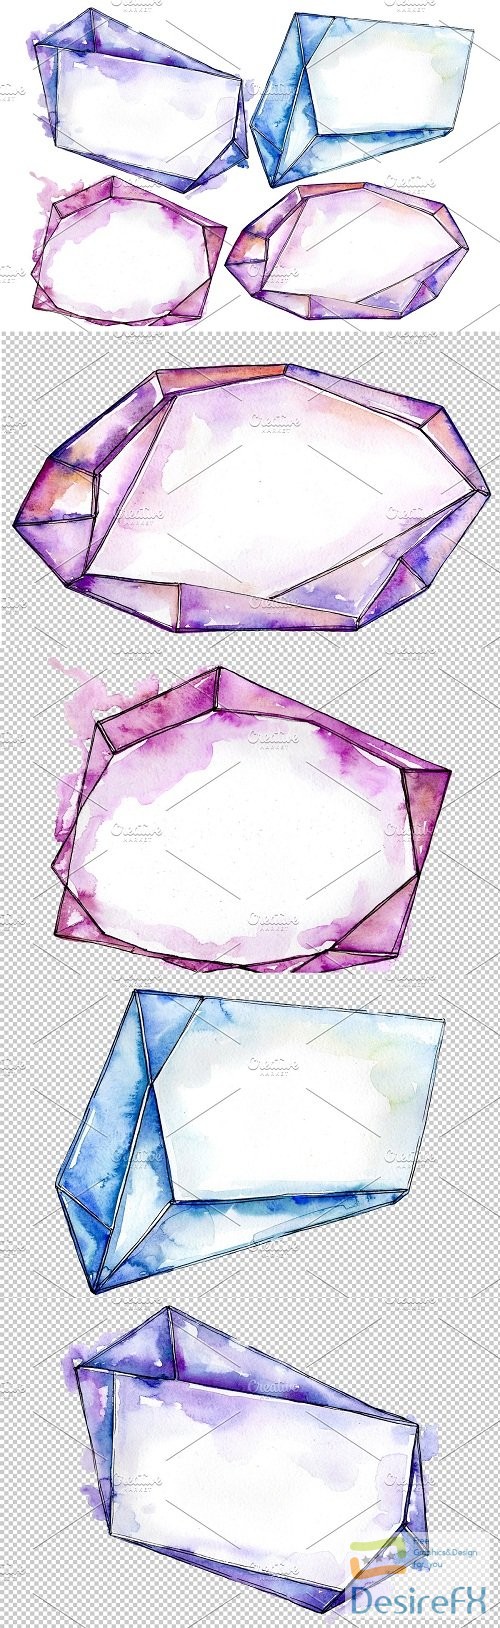 crystals pink and blue Watercolor - 3539710